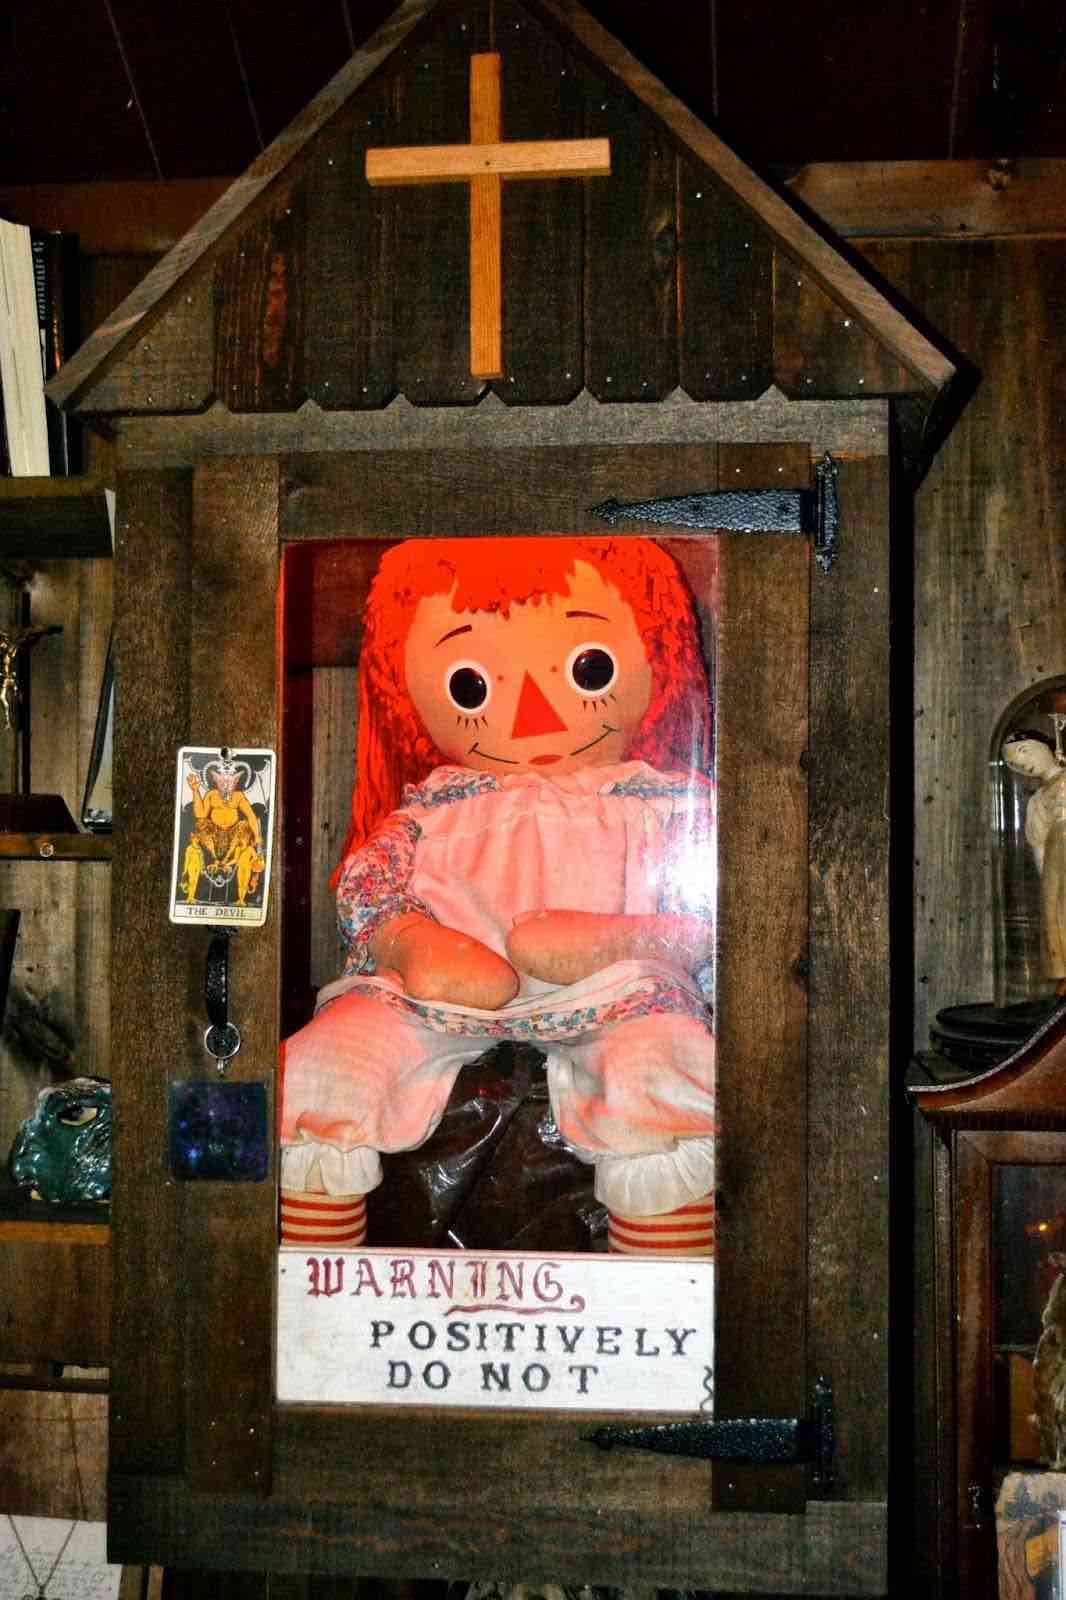 real annabelle in museum